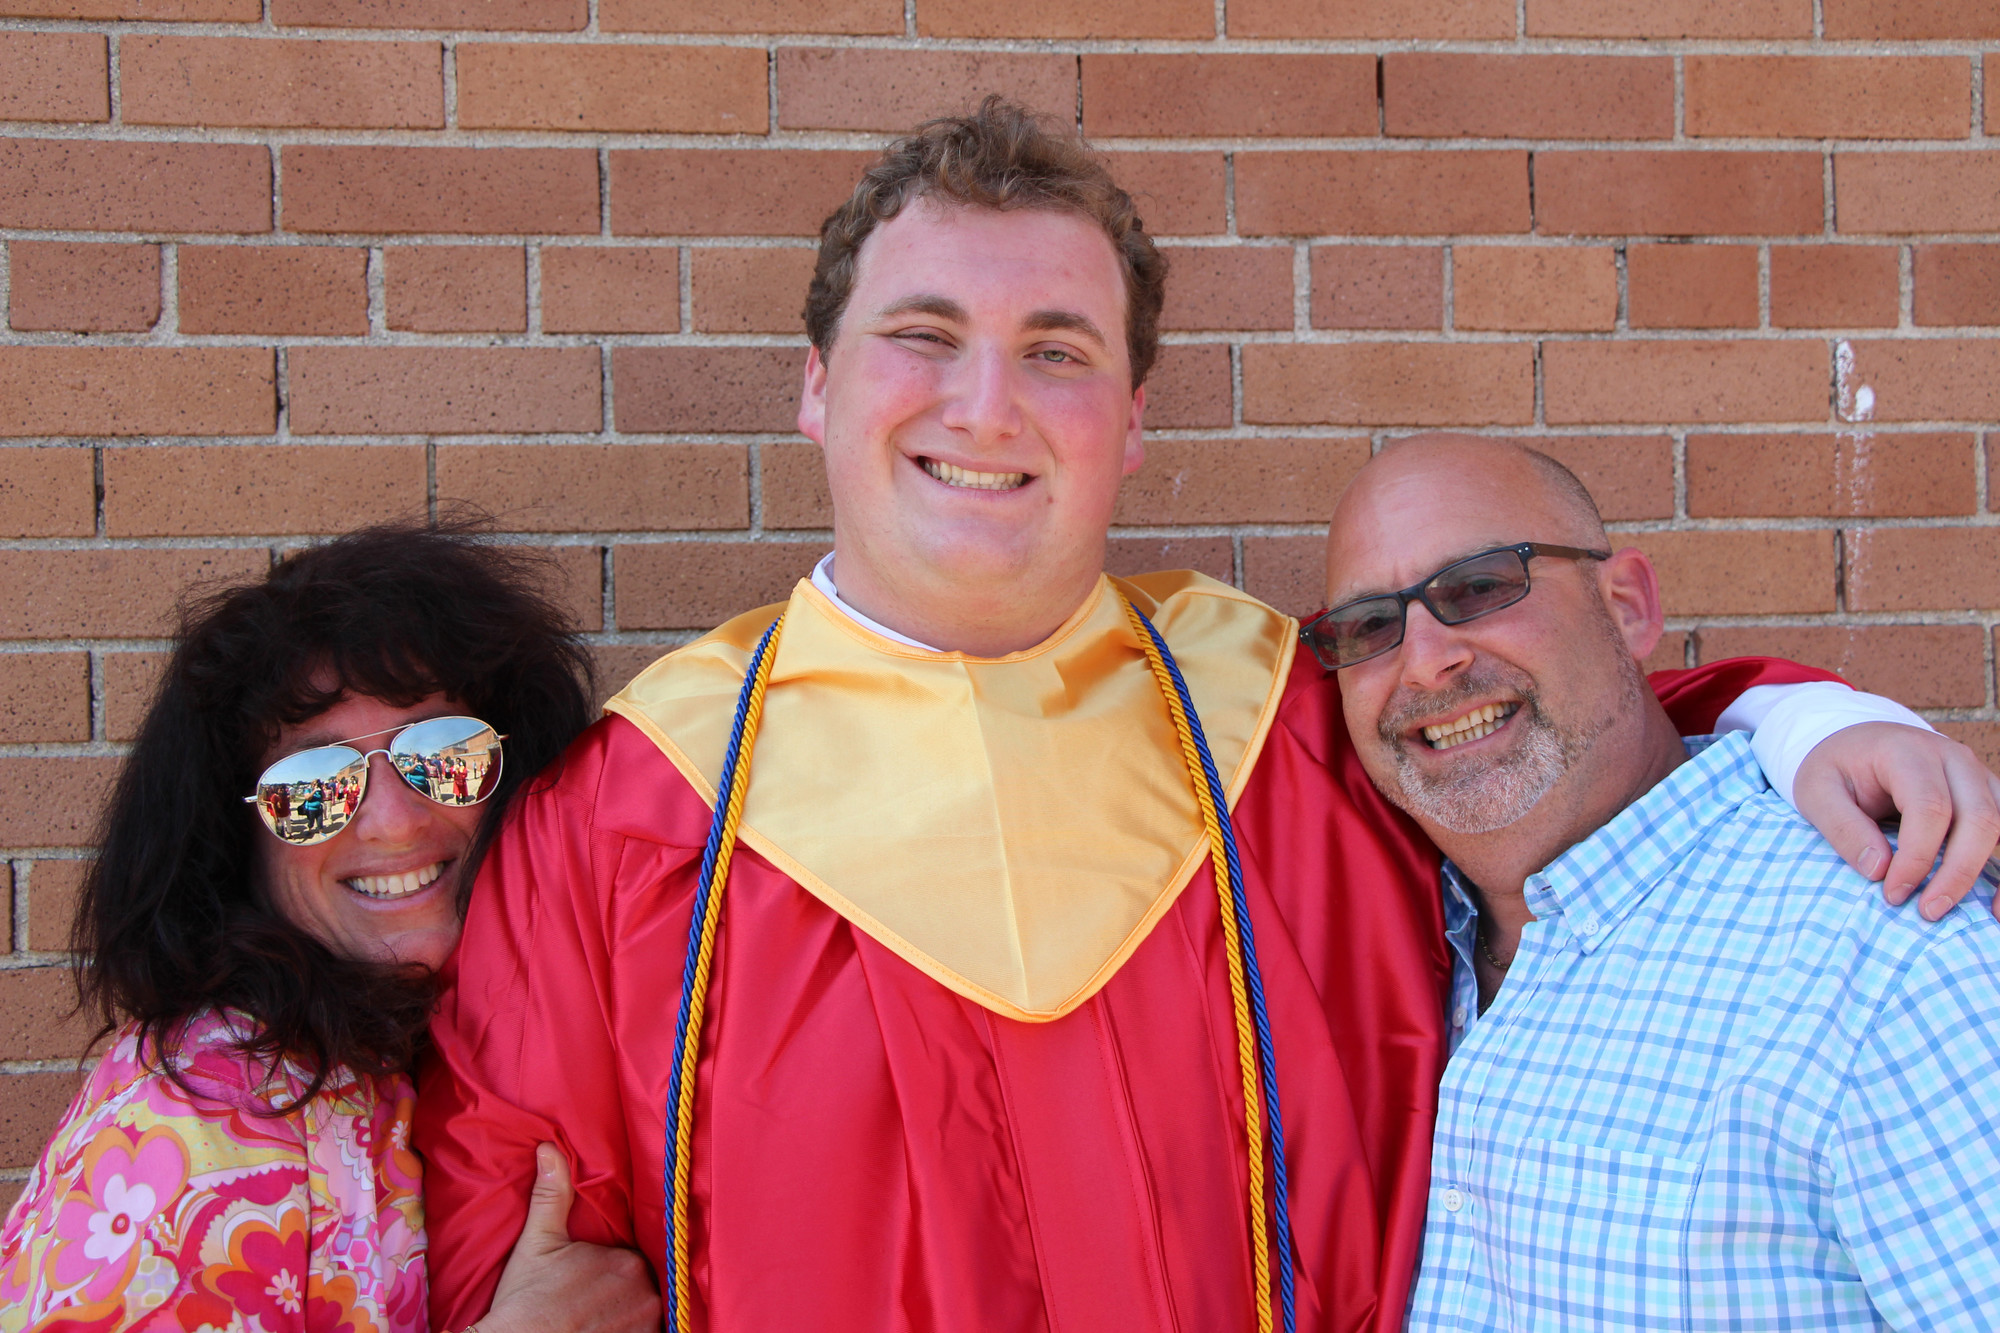 Graduate Jake Moldowsky thanked his father, Lee, and and his mother, Lisa, for all of their help and support. He will continue his education at Stony Brook University.